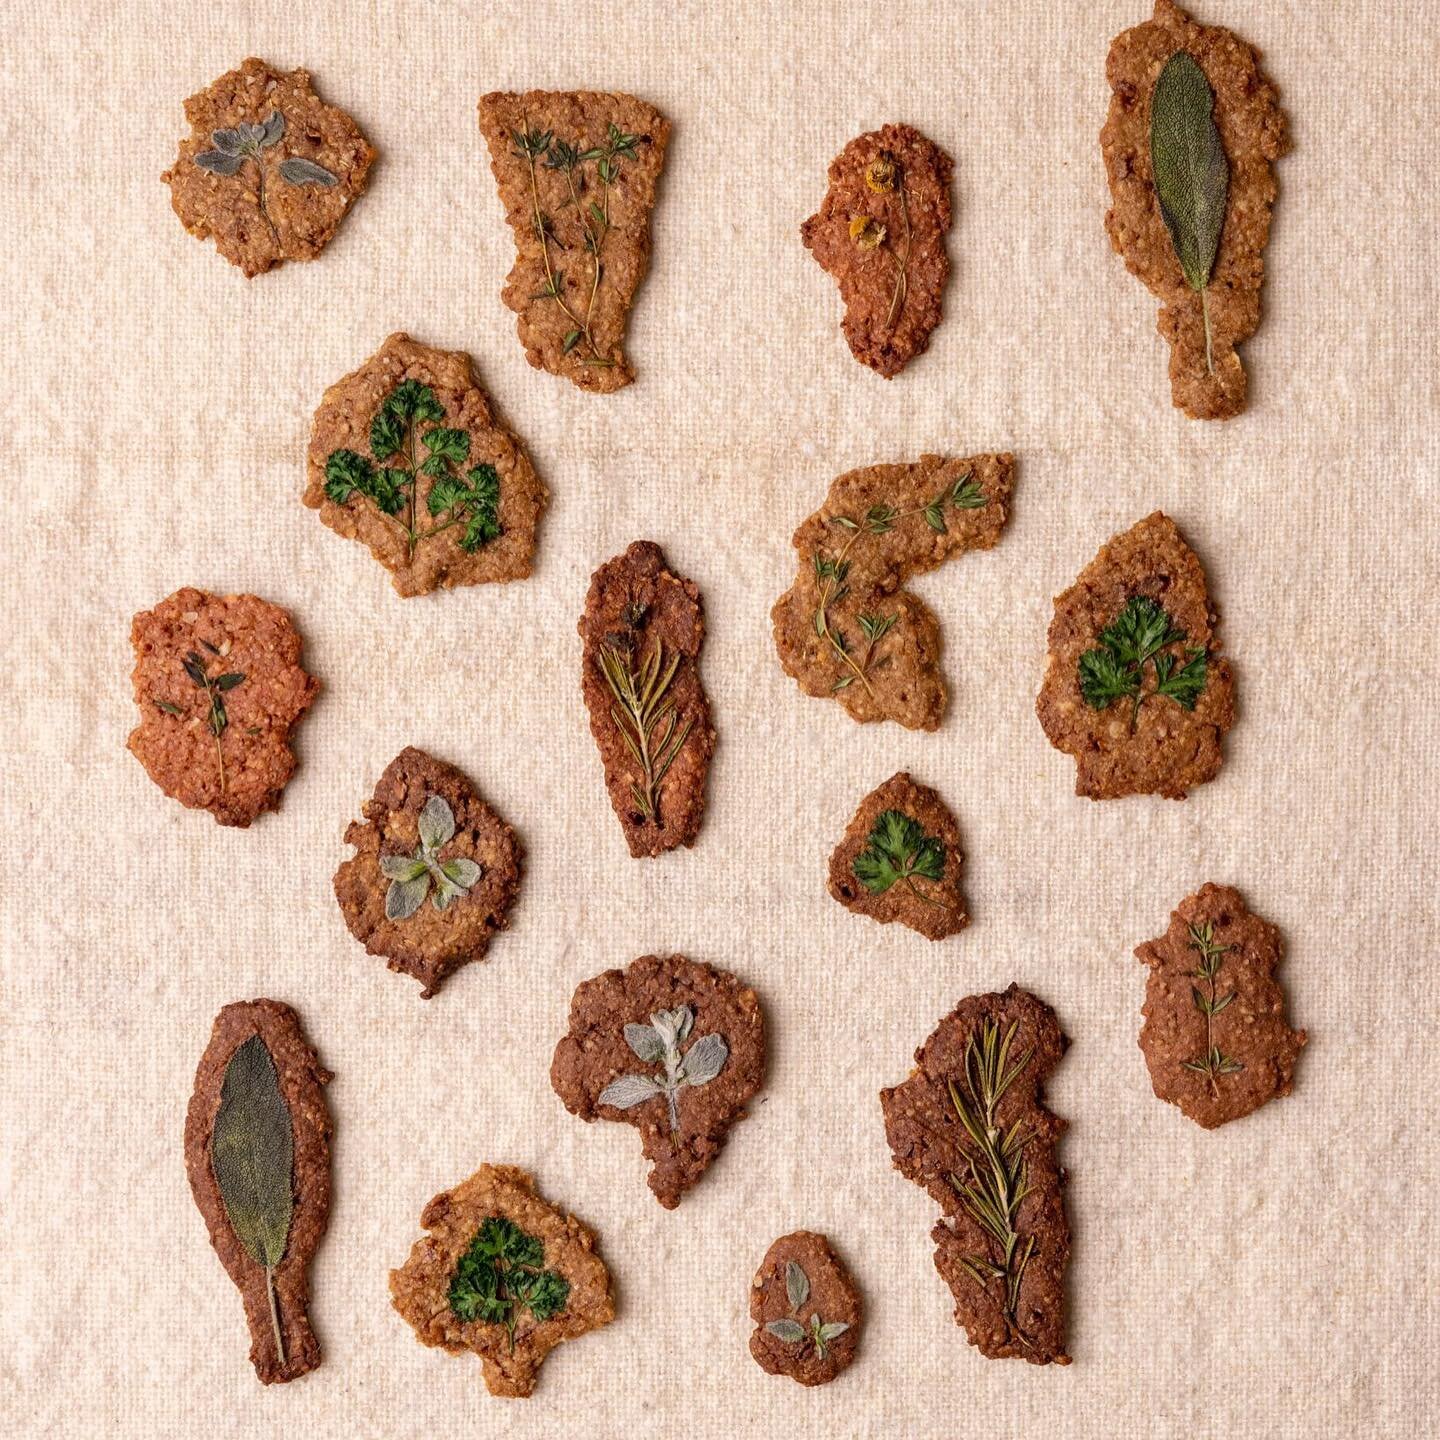 In case you missed my foray into edible art(ists) and have no clue what the link between these earth coloured herb cookies and the great Georgia O&rsquo;Keeffe might be: I saved the story in my highlights!